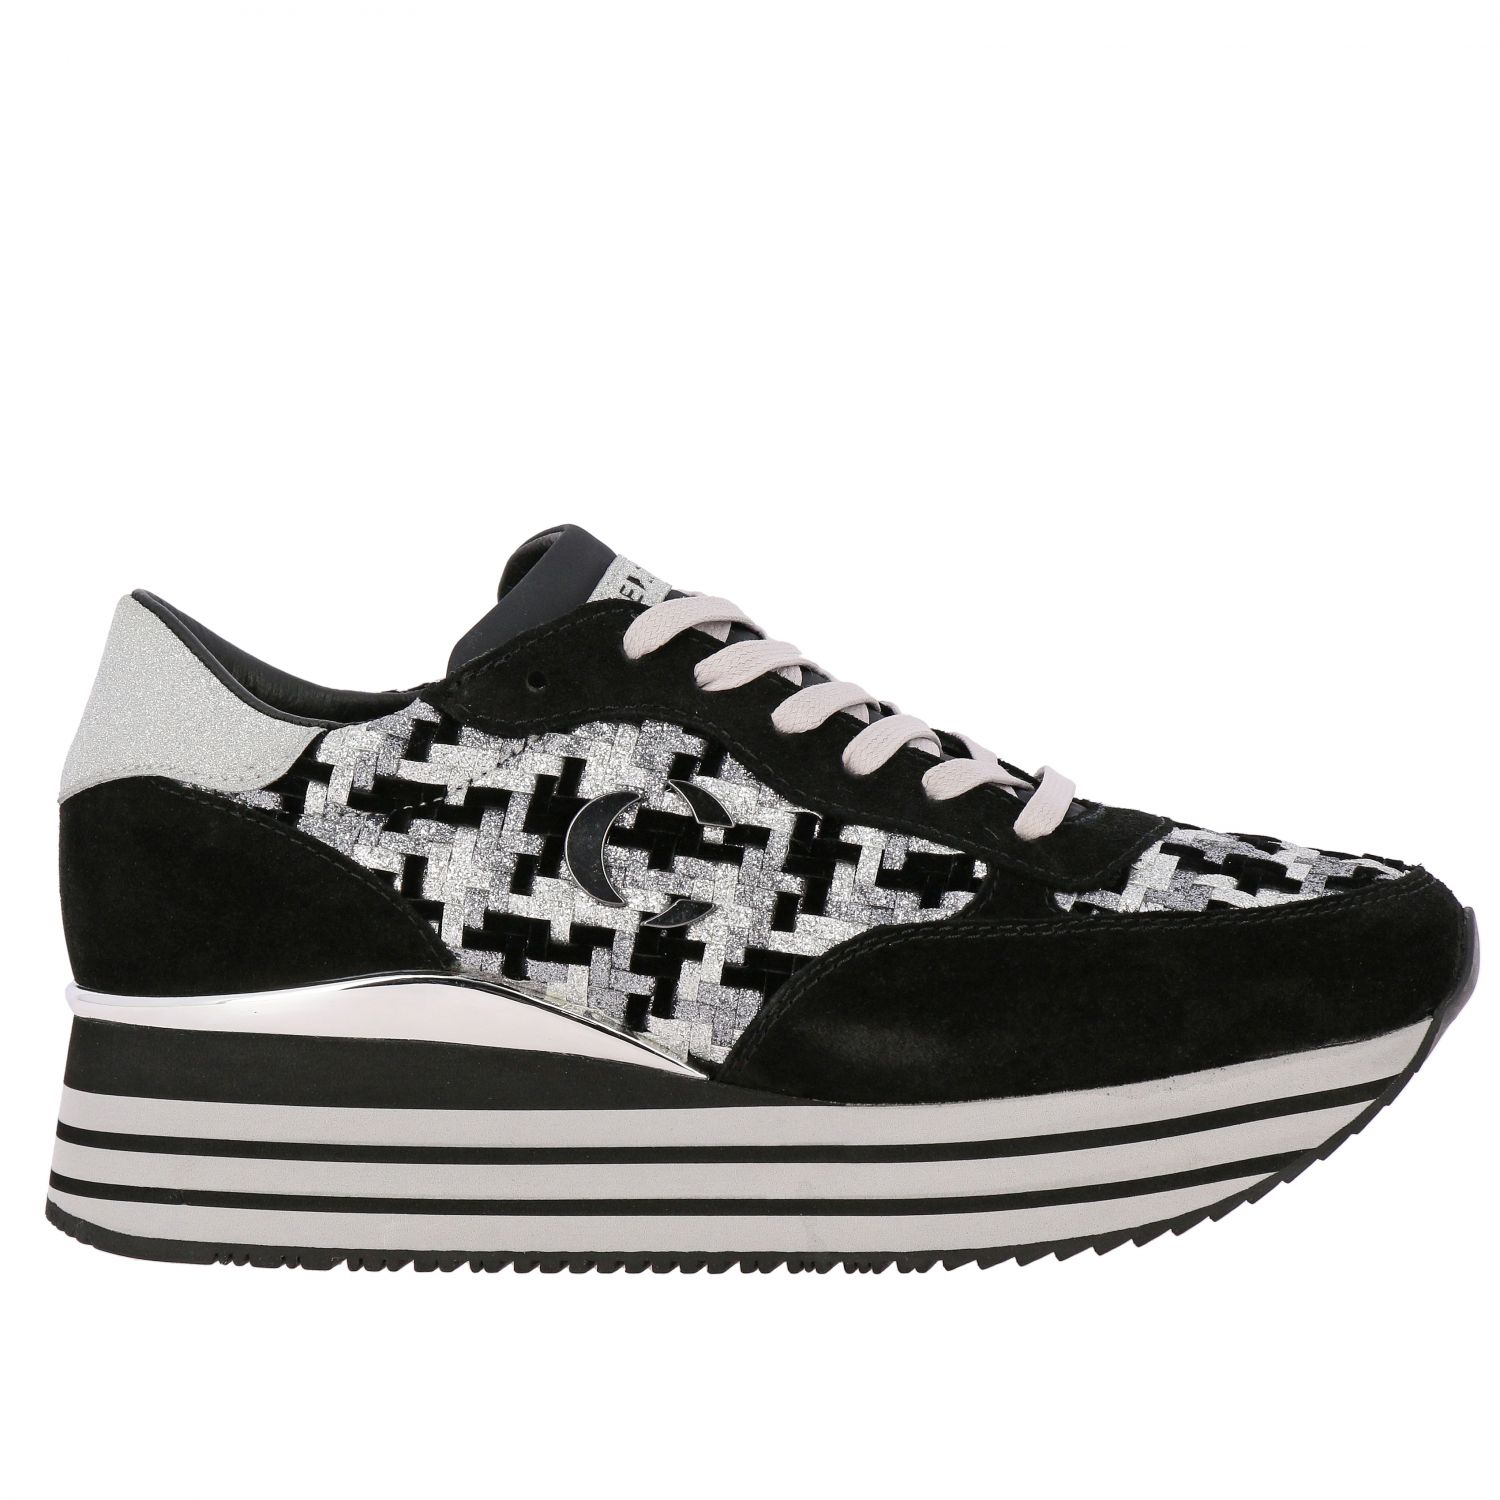 Crime London Outlet: sneakers for woman - Black | Crime London sneakers ...